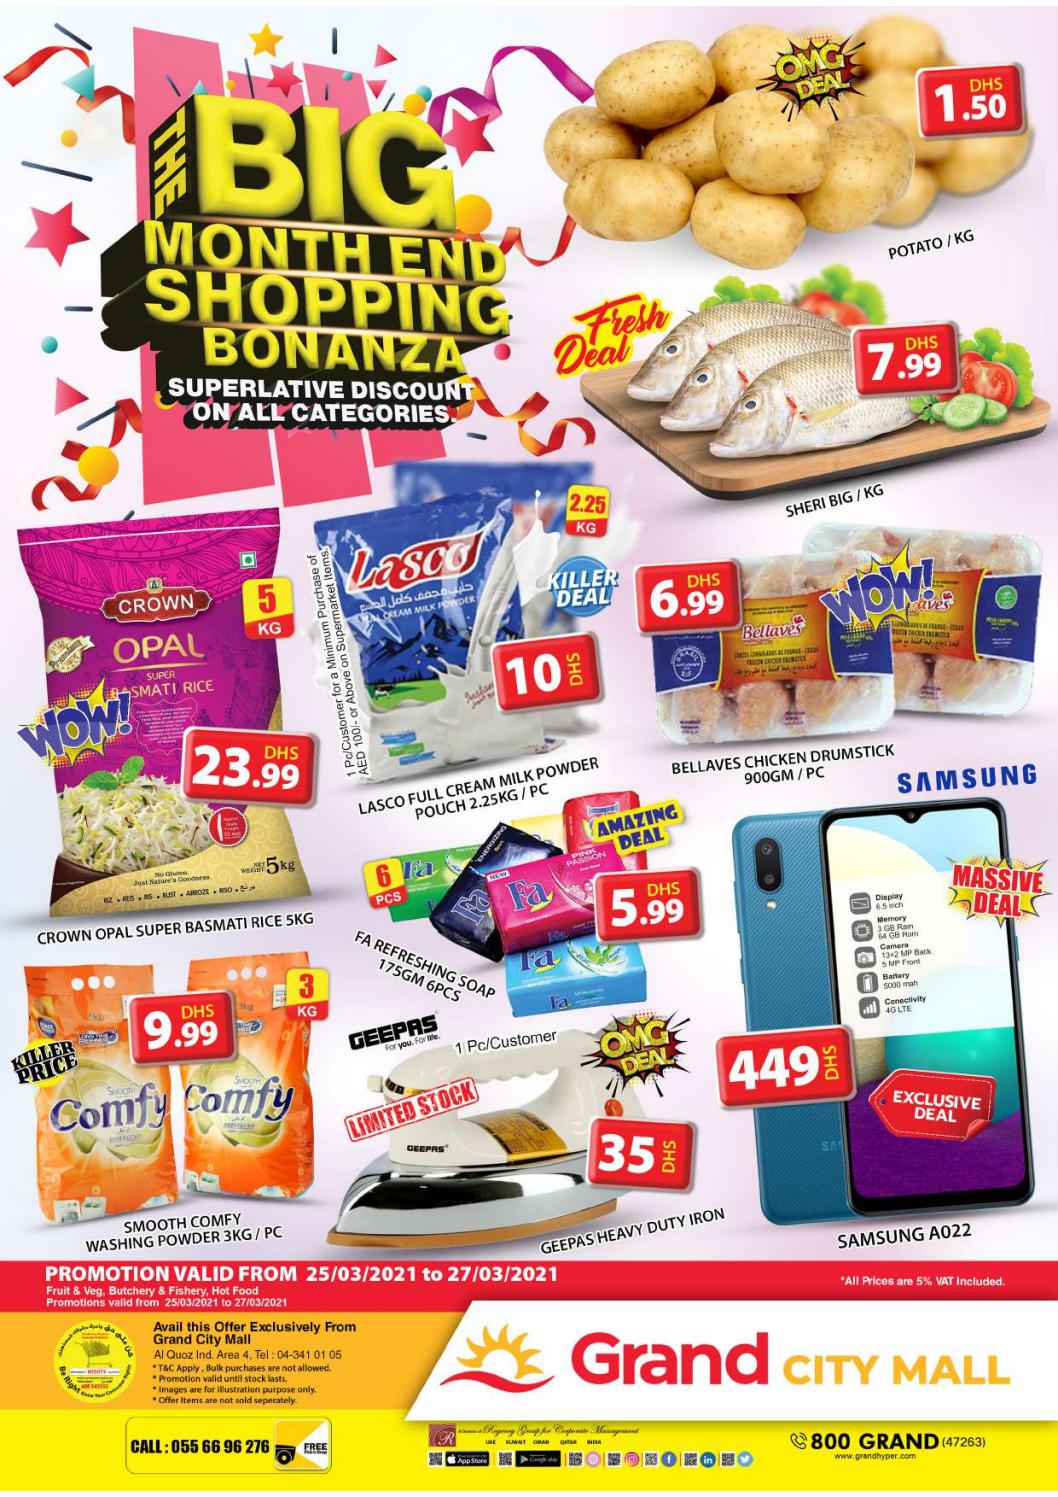 Month End Deals at Grand City Mall 2021 – Catalog